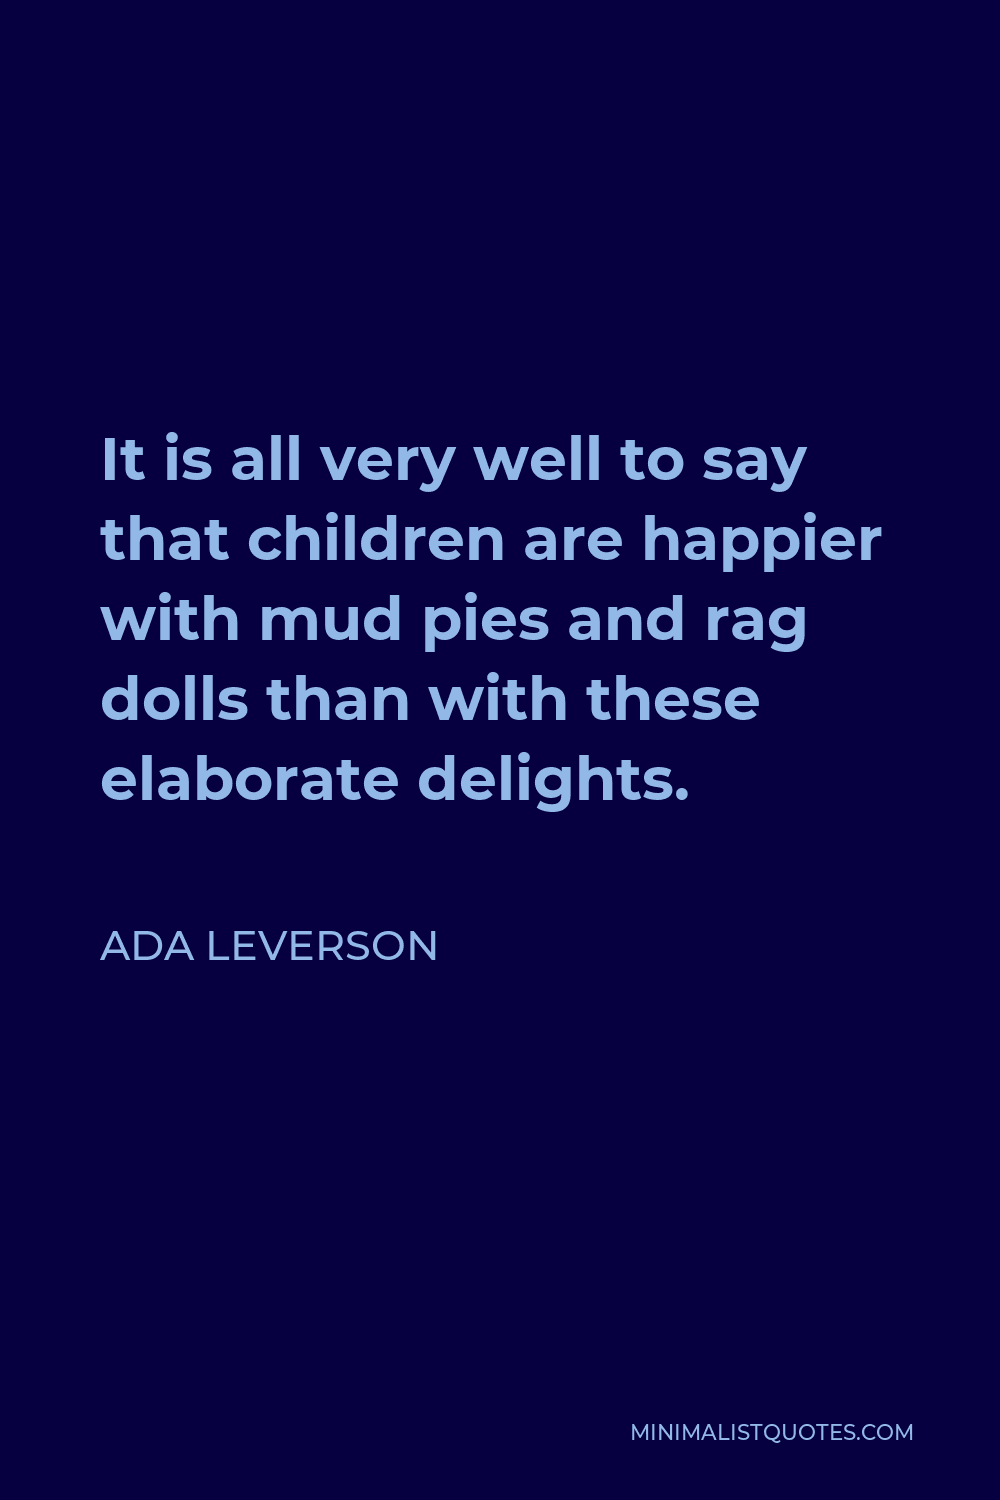 Ada Leverson Quote - It is all very well to say that children are happier with mud pies and rag dolls than with these elaborate delights.